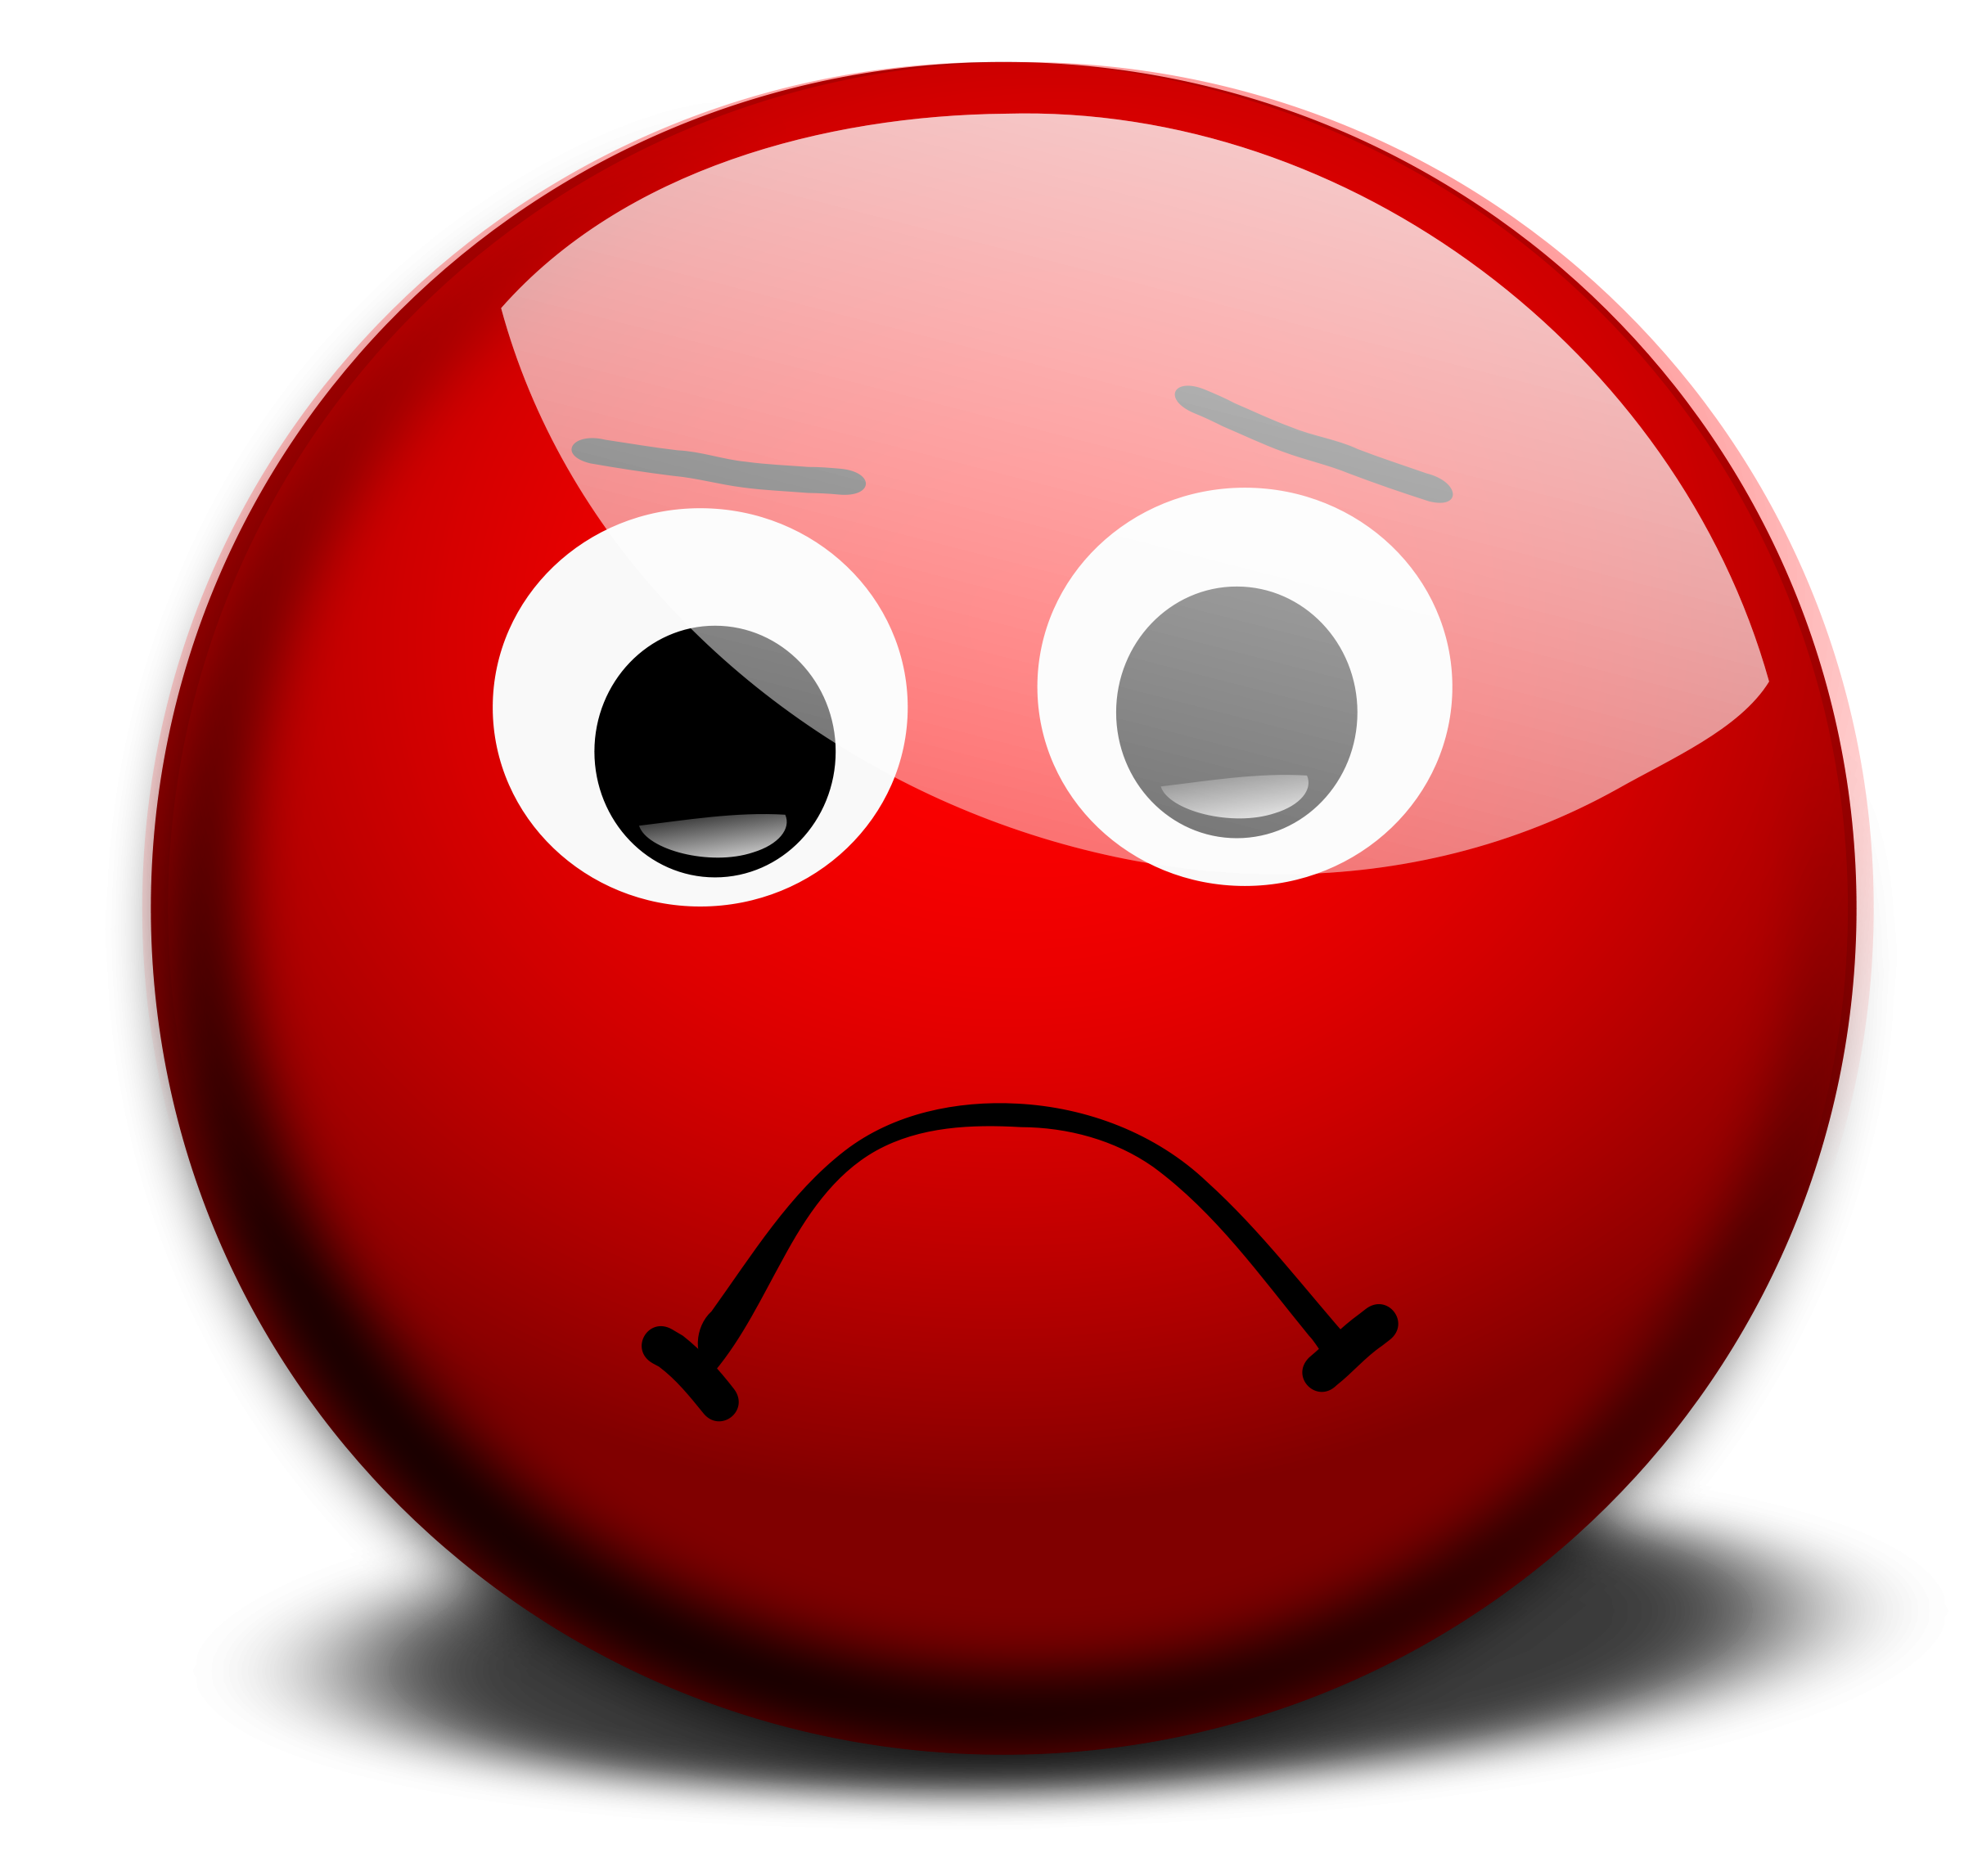 Red Sad Face Images & Pictures - Becuo